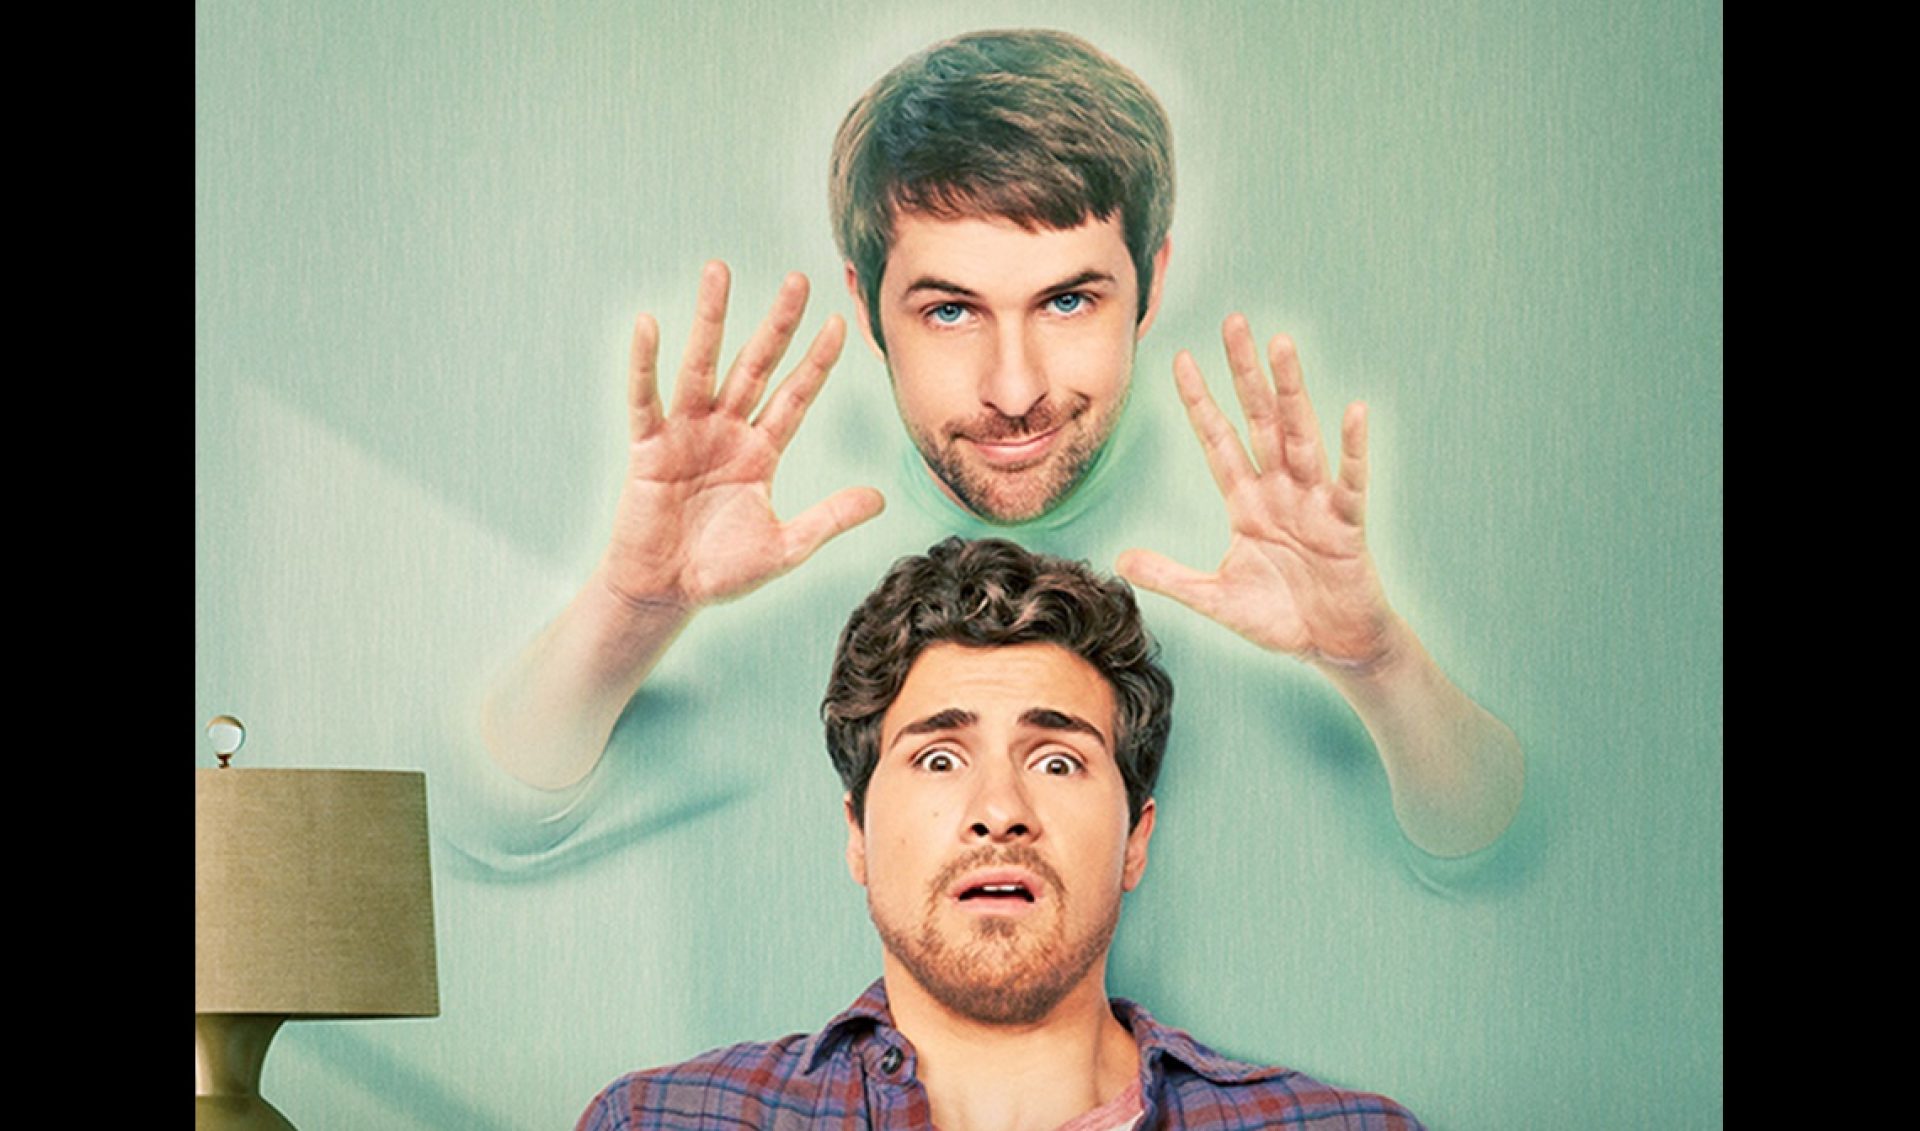 Here’s The Trailer For ‘Ghostmates,’ The New Movie From YouTube Stars Smosh